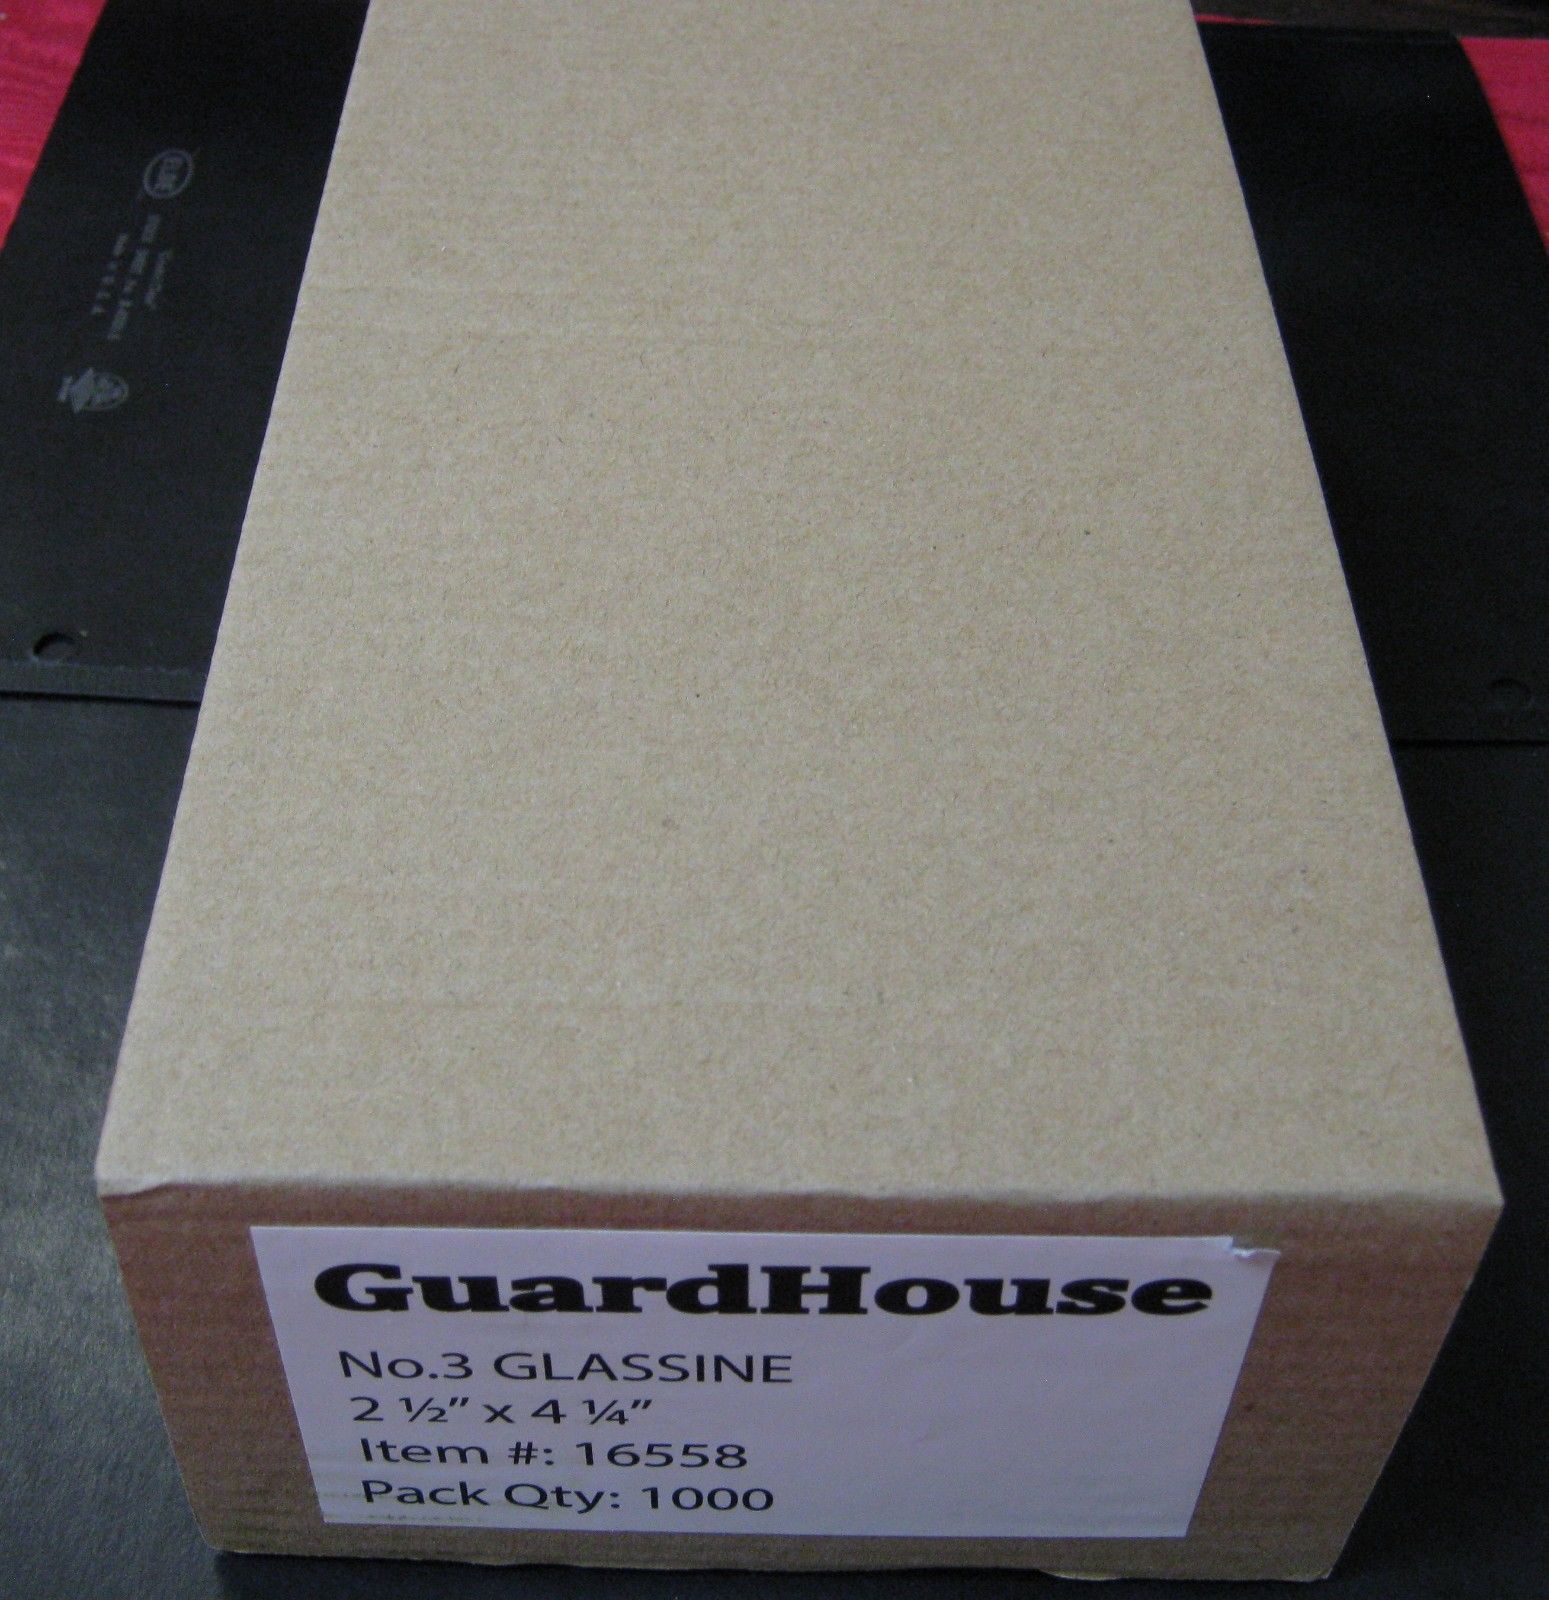 GUARDHOUSE BRAND GLASSINE ENVELOPE SIZE #3. BOX OF 1000 COUNT. 2 1/2" x 4 1/4"